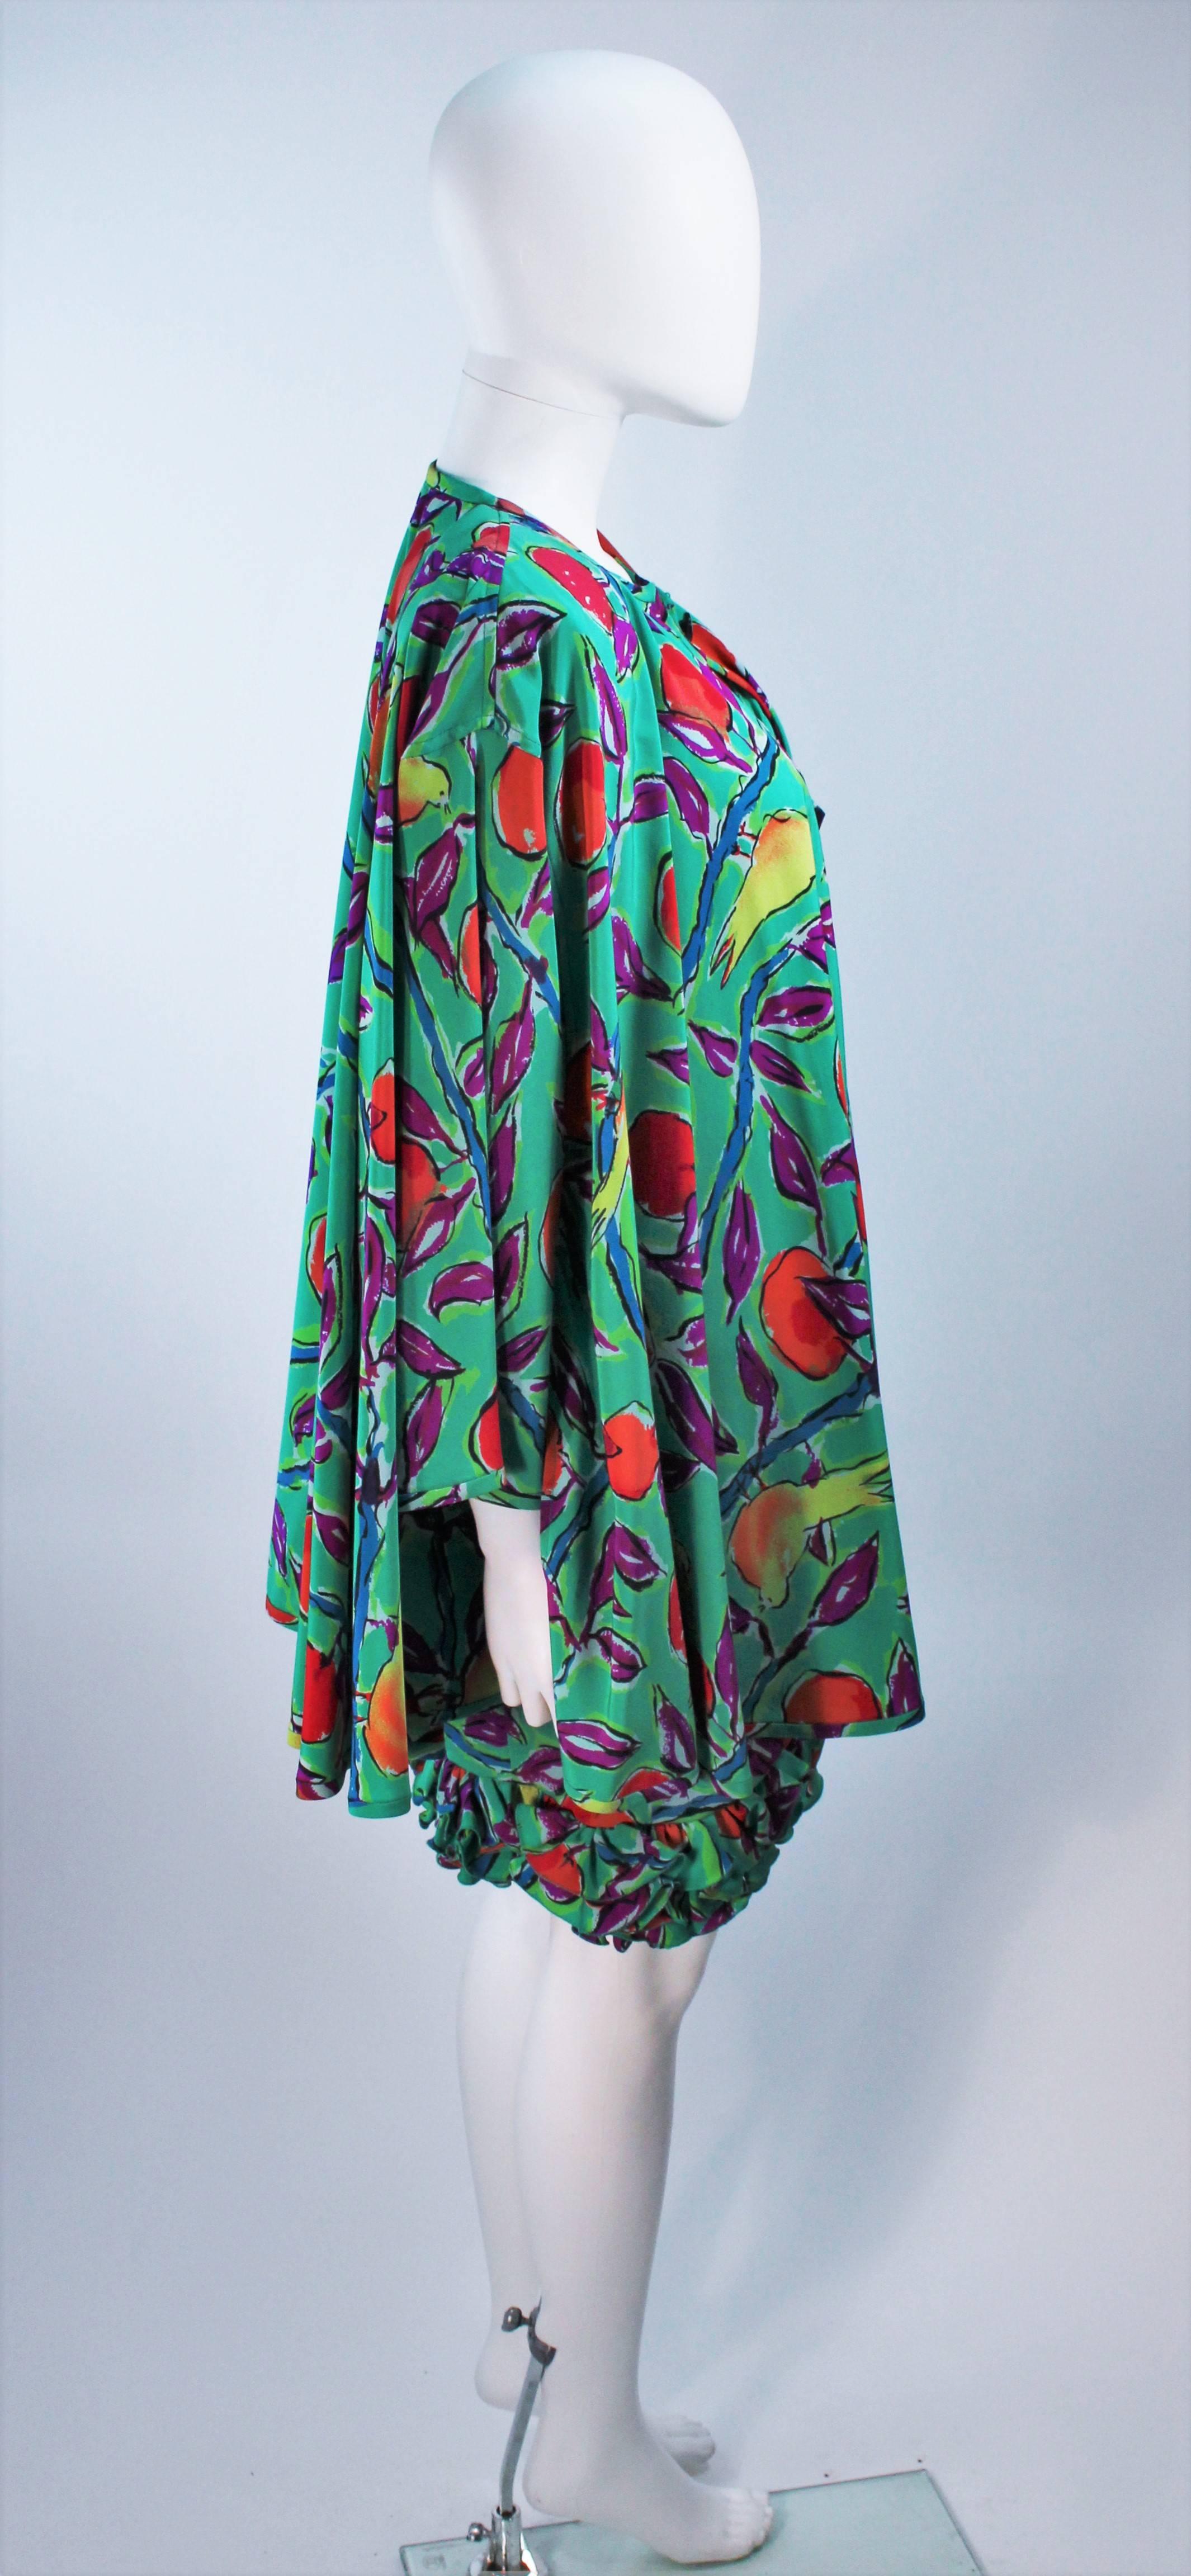 EMANUEL UNGARO Silk Cocktail Dress with Coat Size 8 For Sale 2